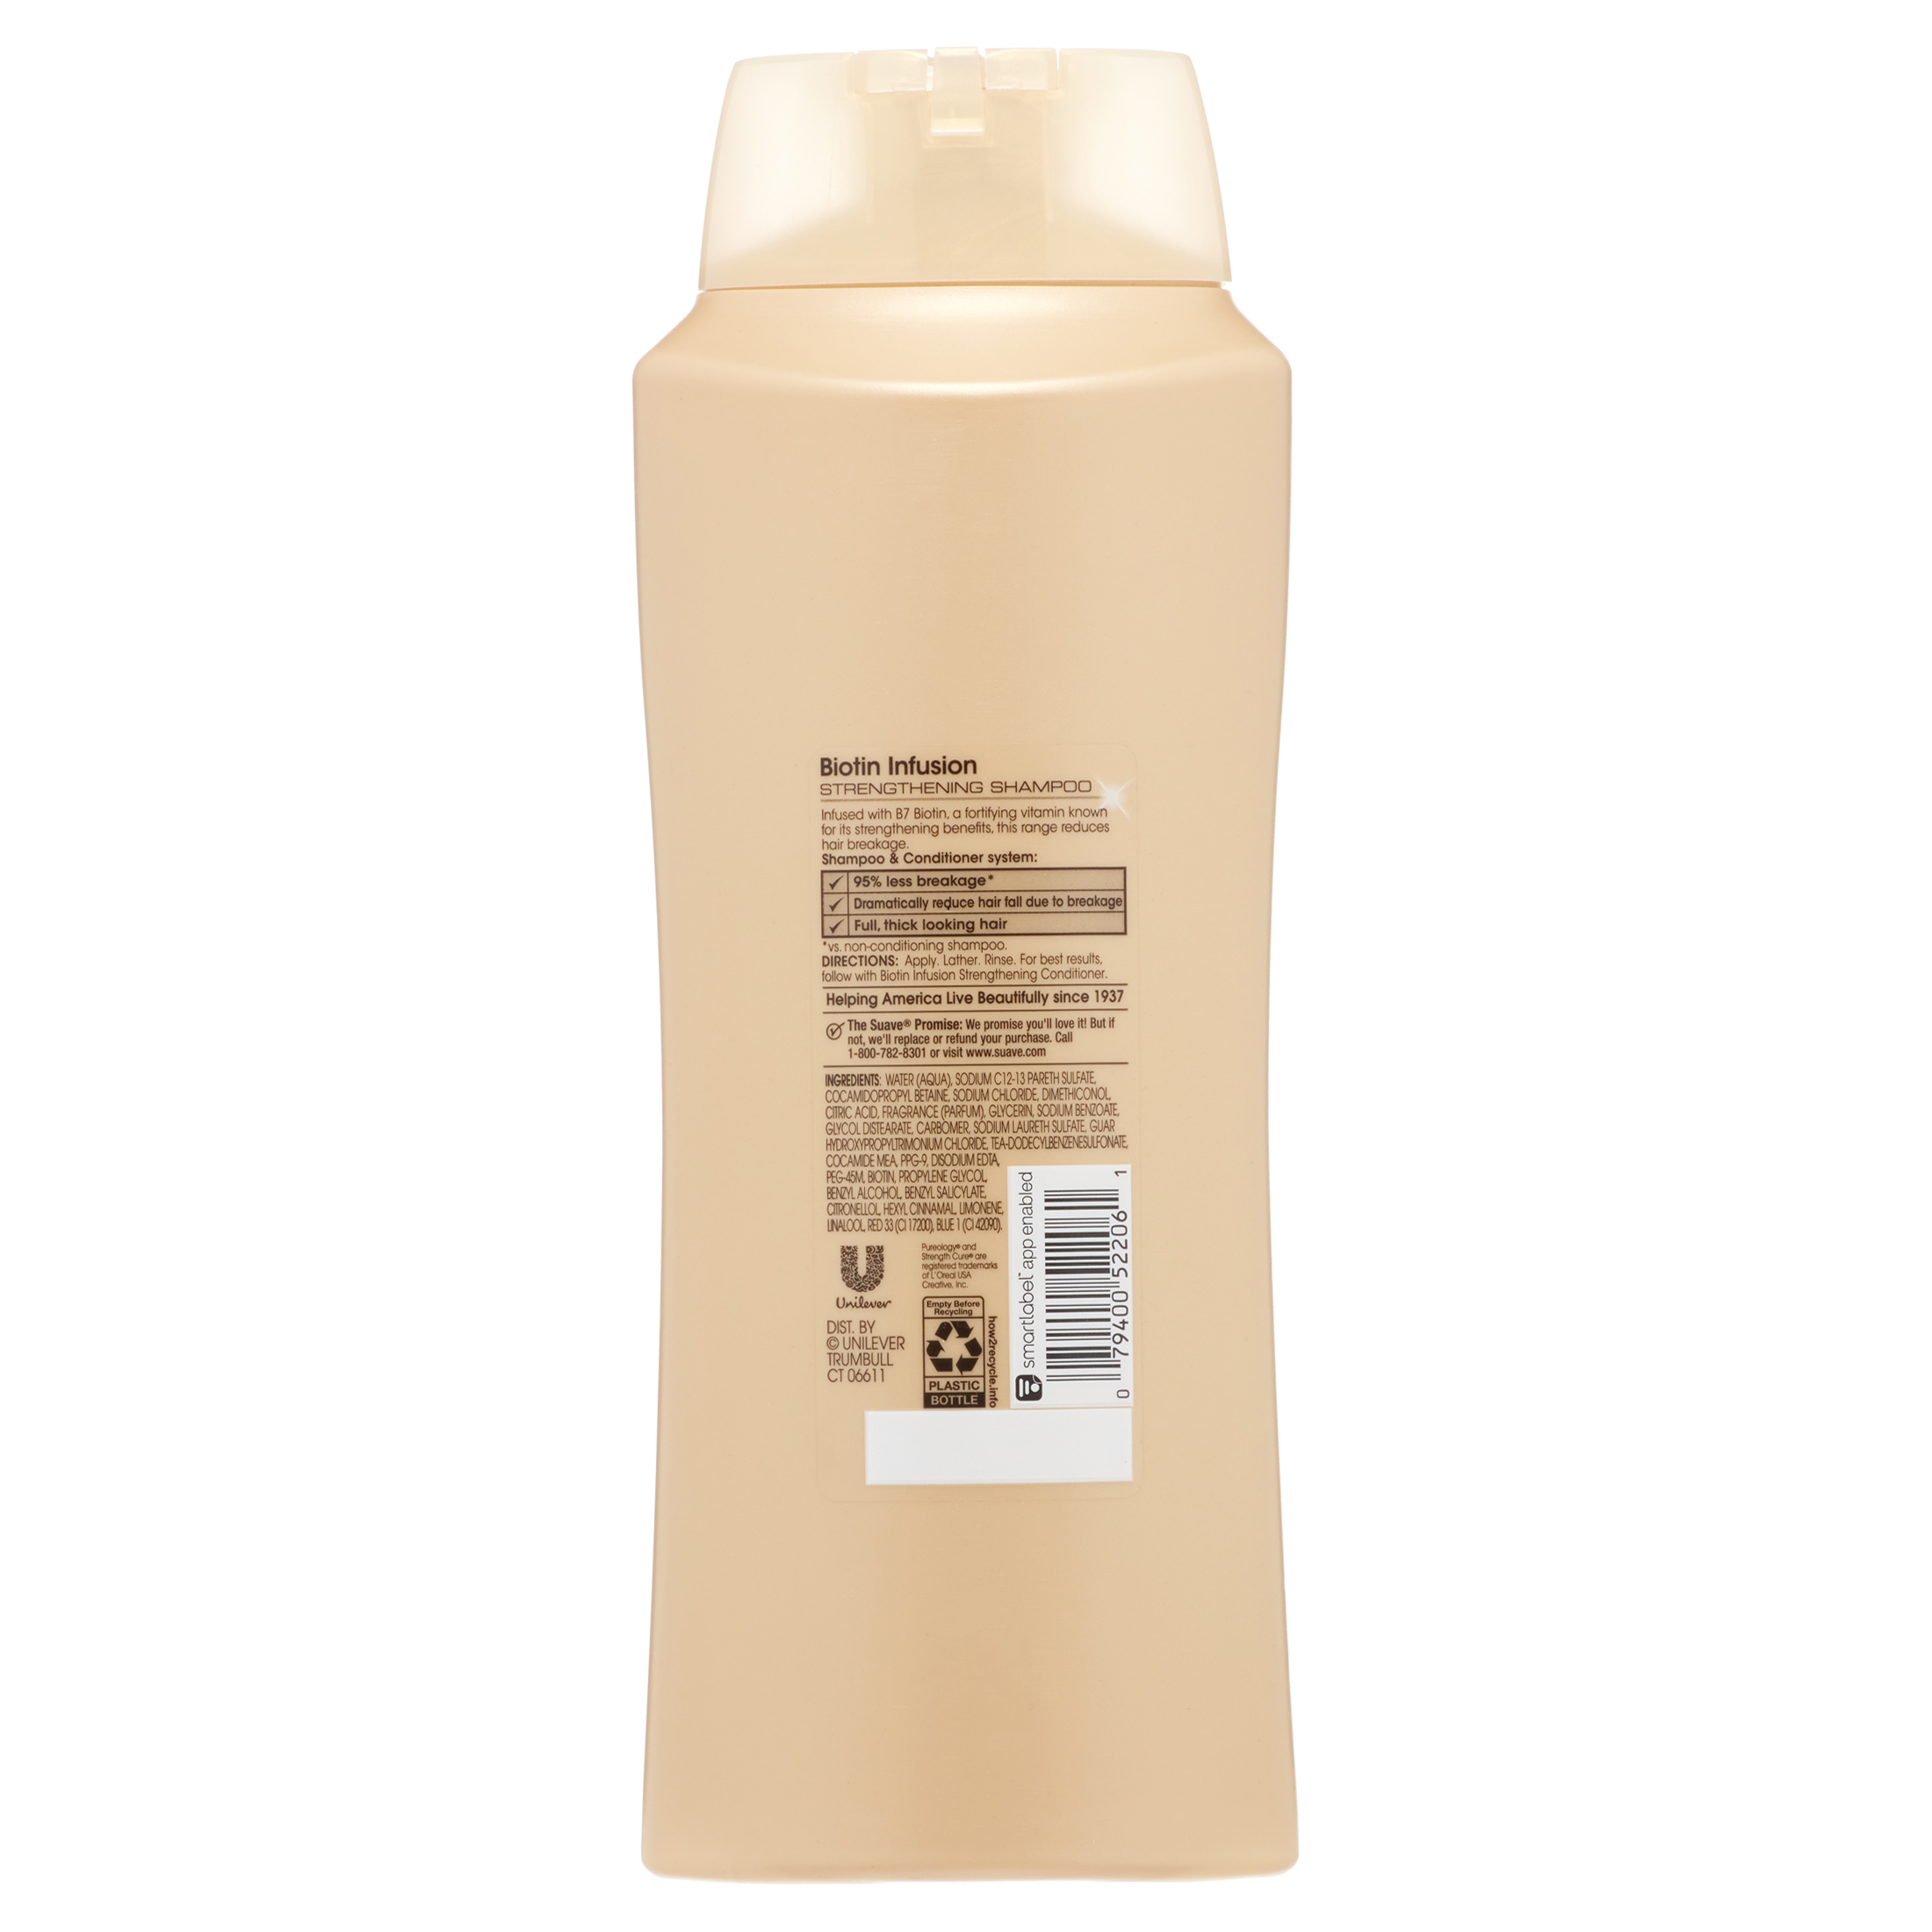 Suave Professionals Biotin Infusion Shampoo, Strengthening & Thickening, 28 fl oz - image 3 of 11